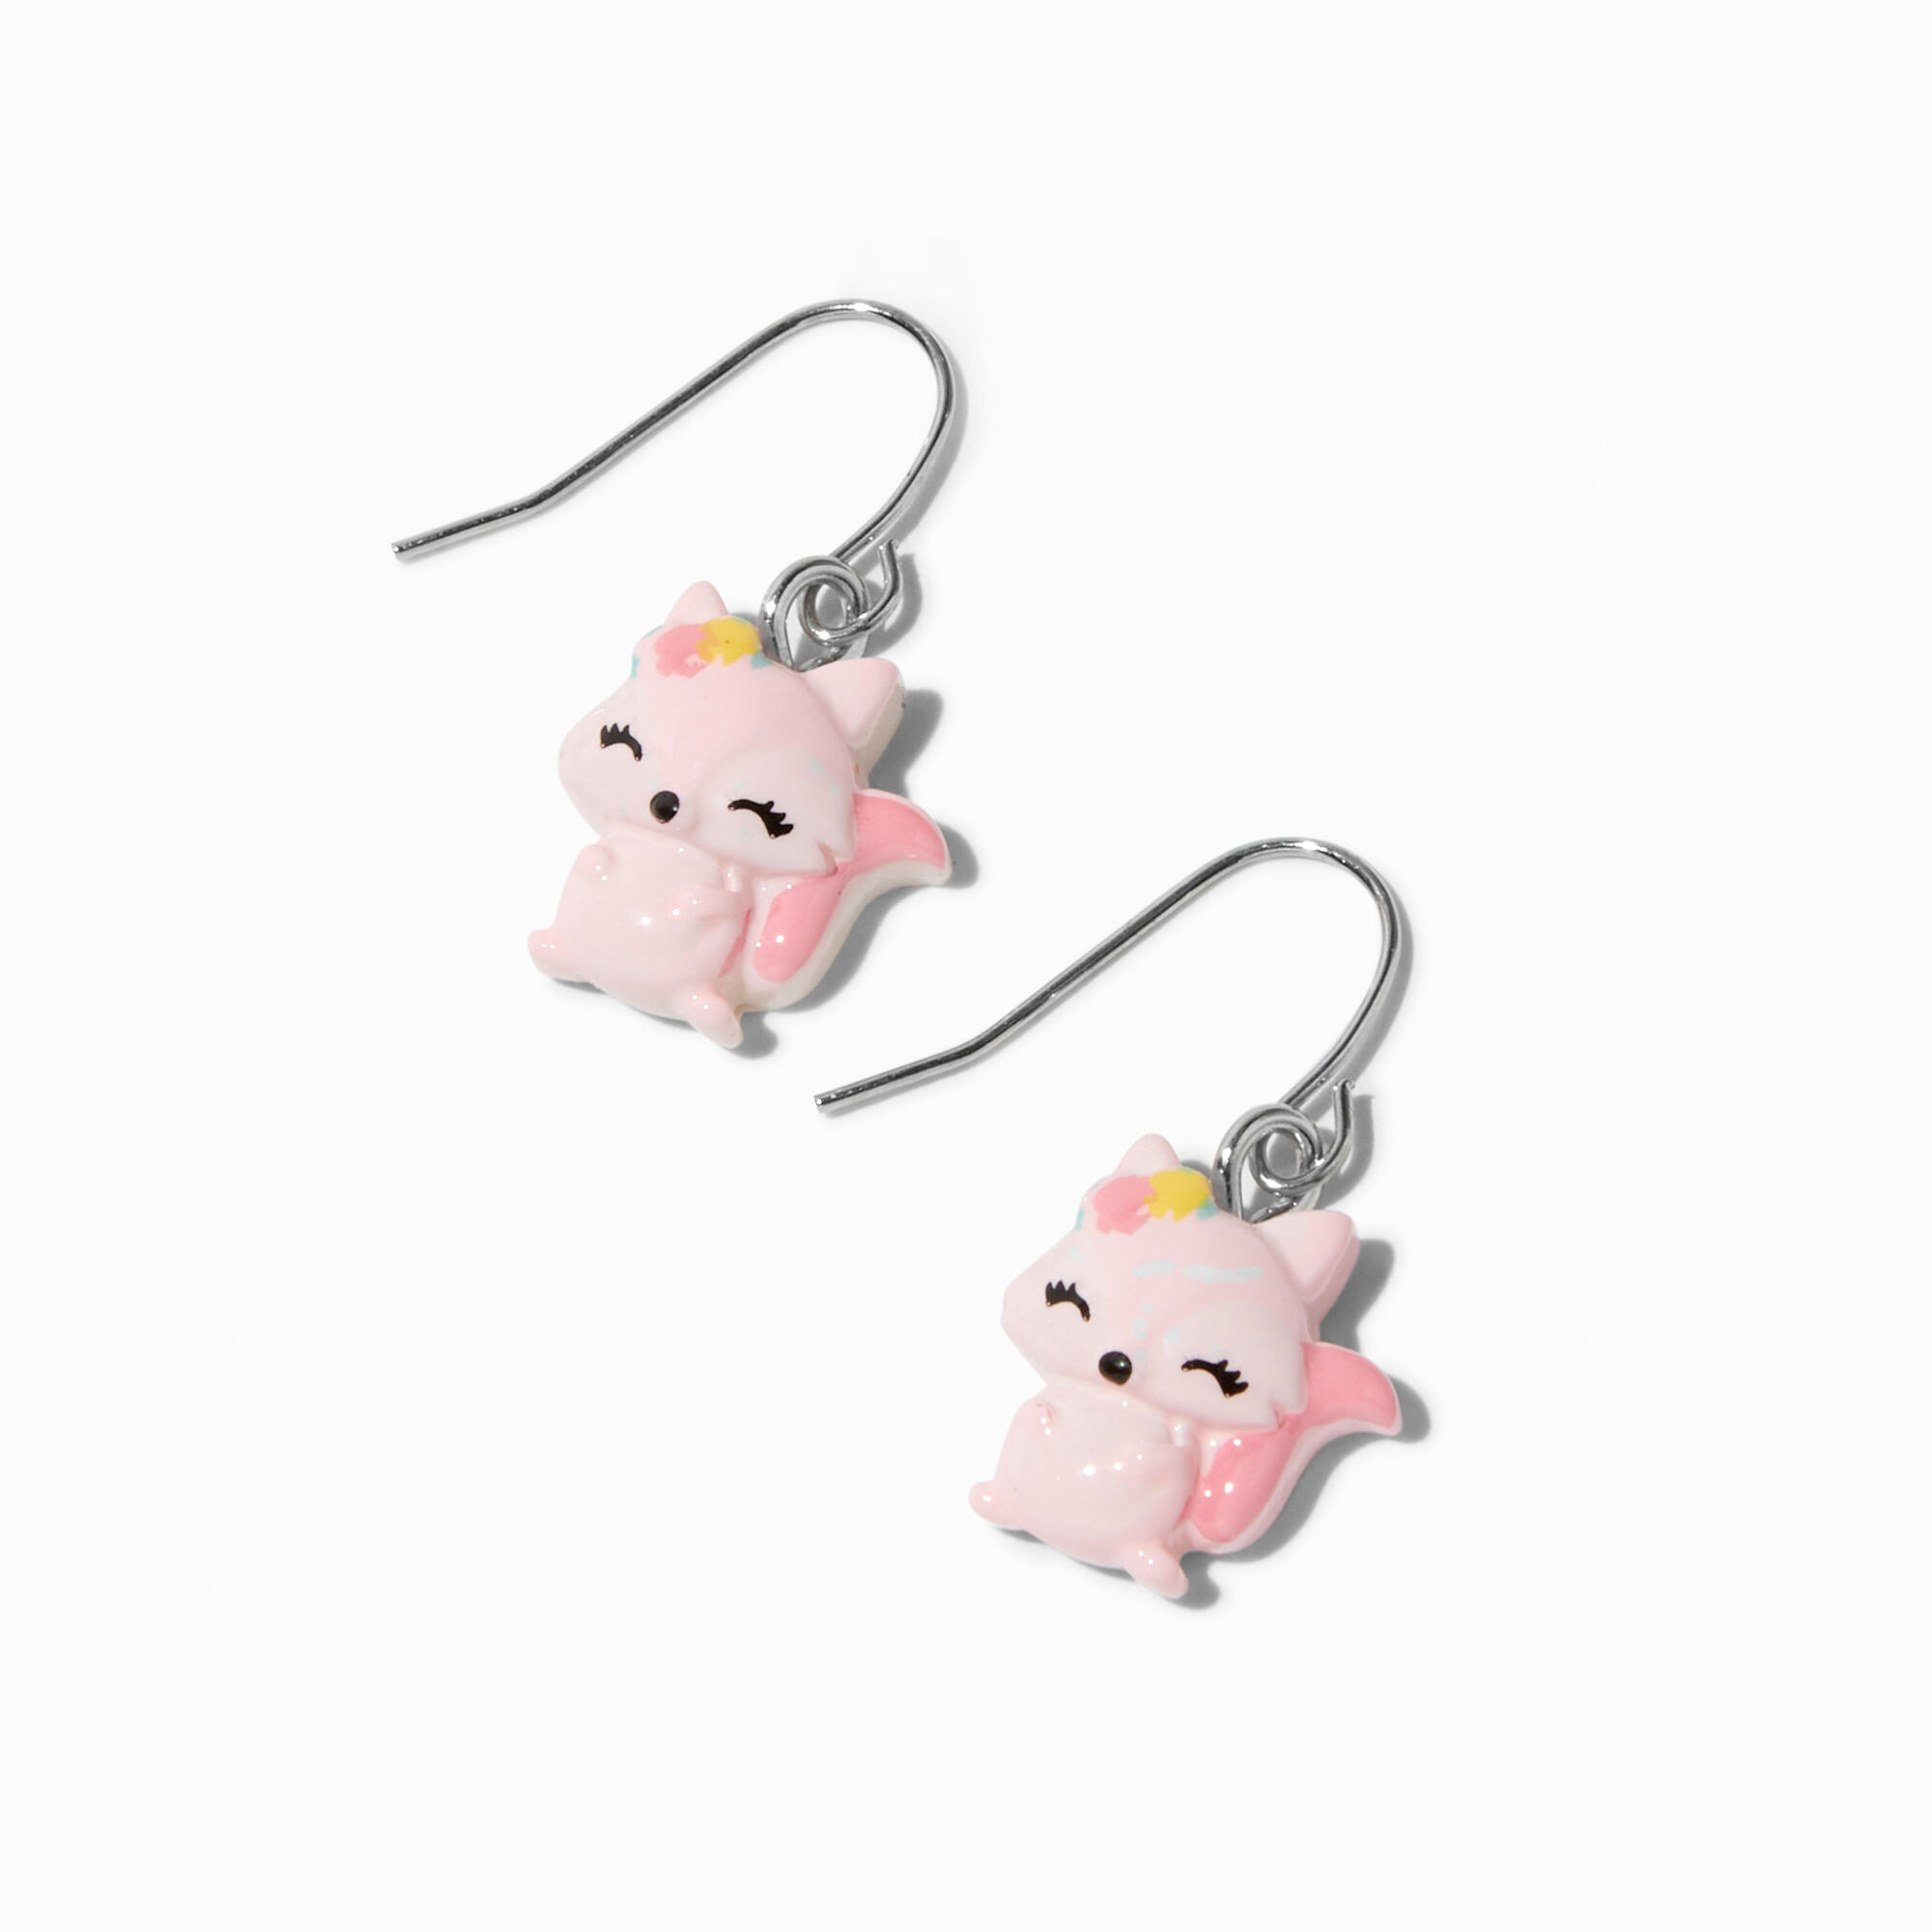 View Claires Fox 1 Drop Earrings Pink information